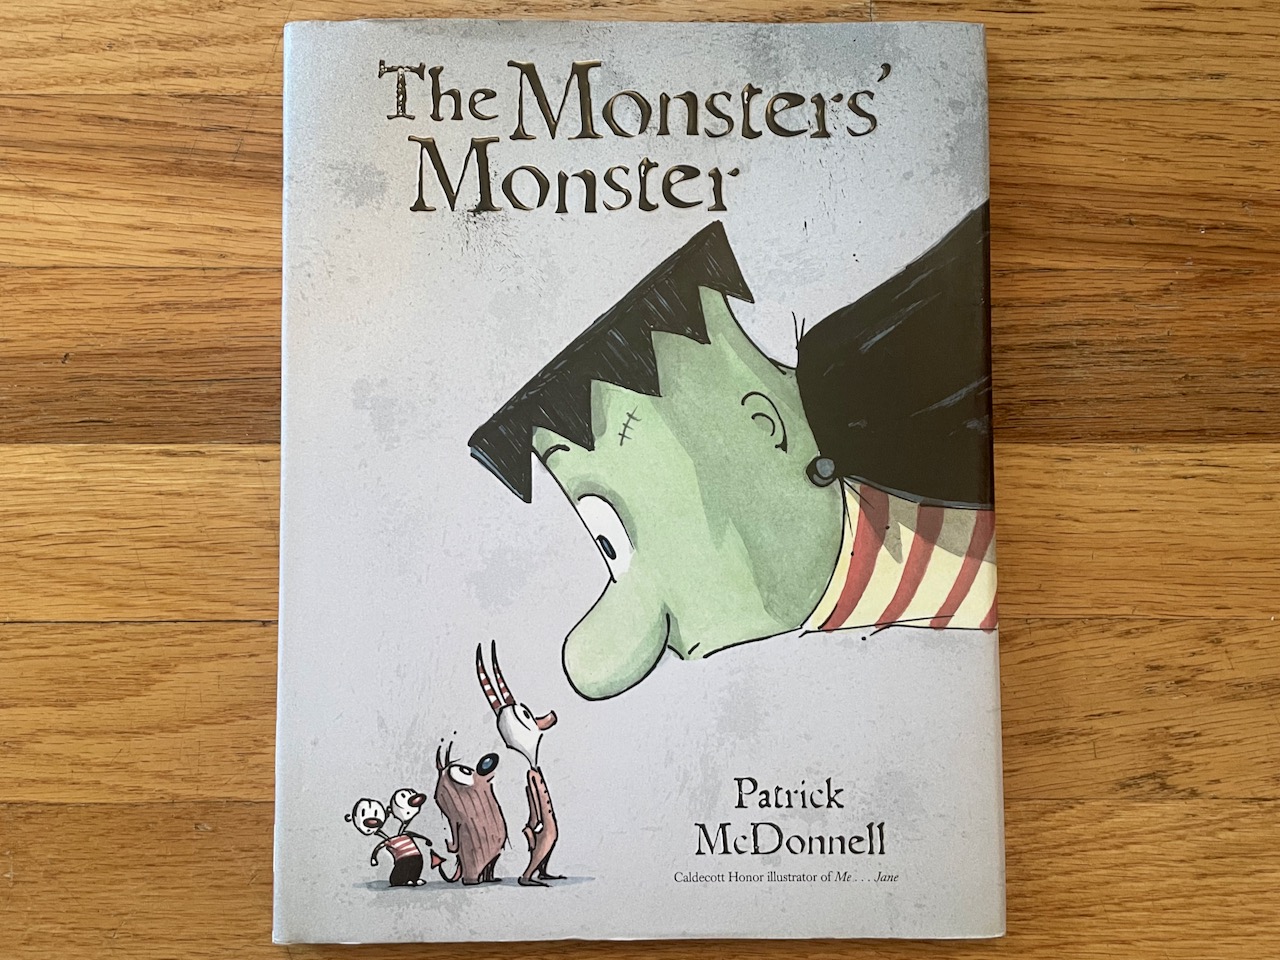 A picture book called The Monsters' Monster by Patrick McDonell. Has a large Frankenstein type monster leaning over and looking at four little monsters.